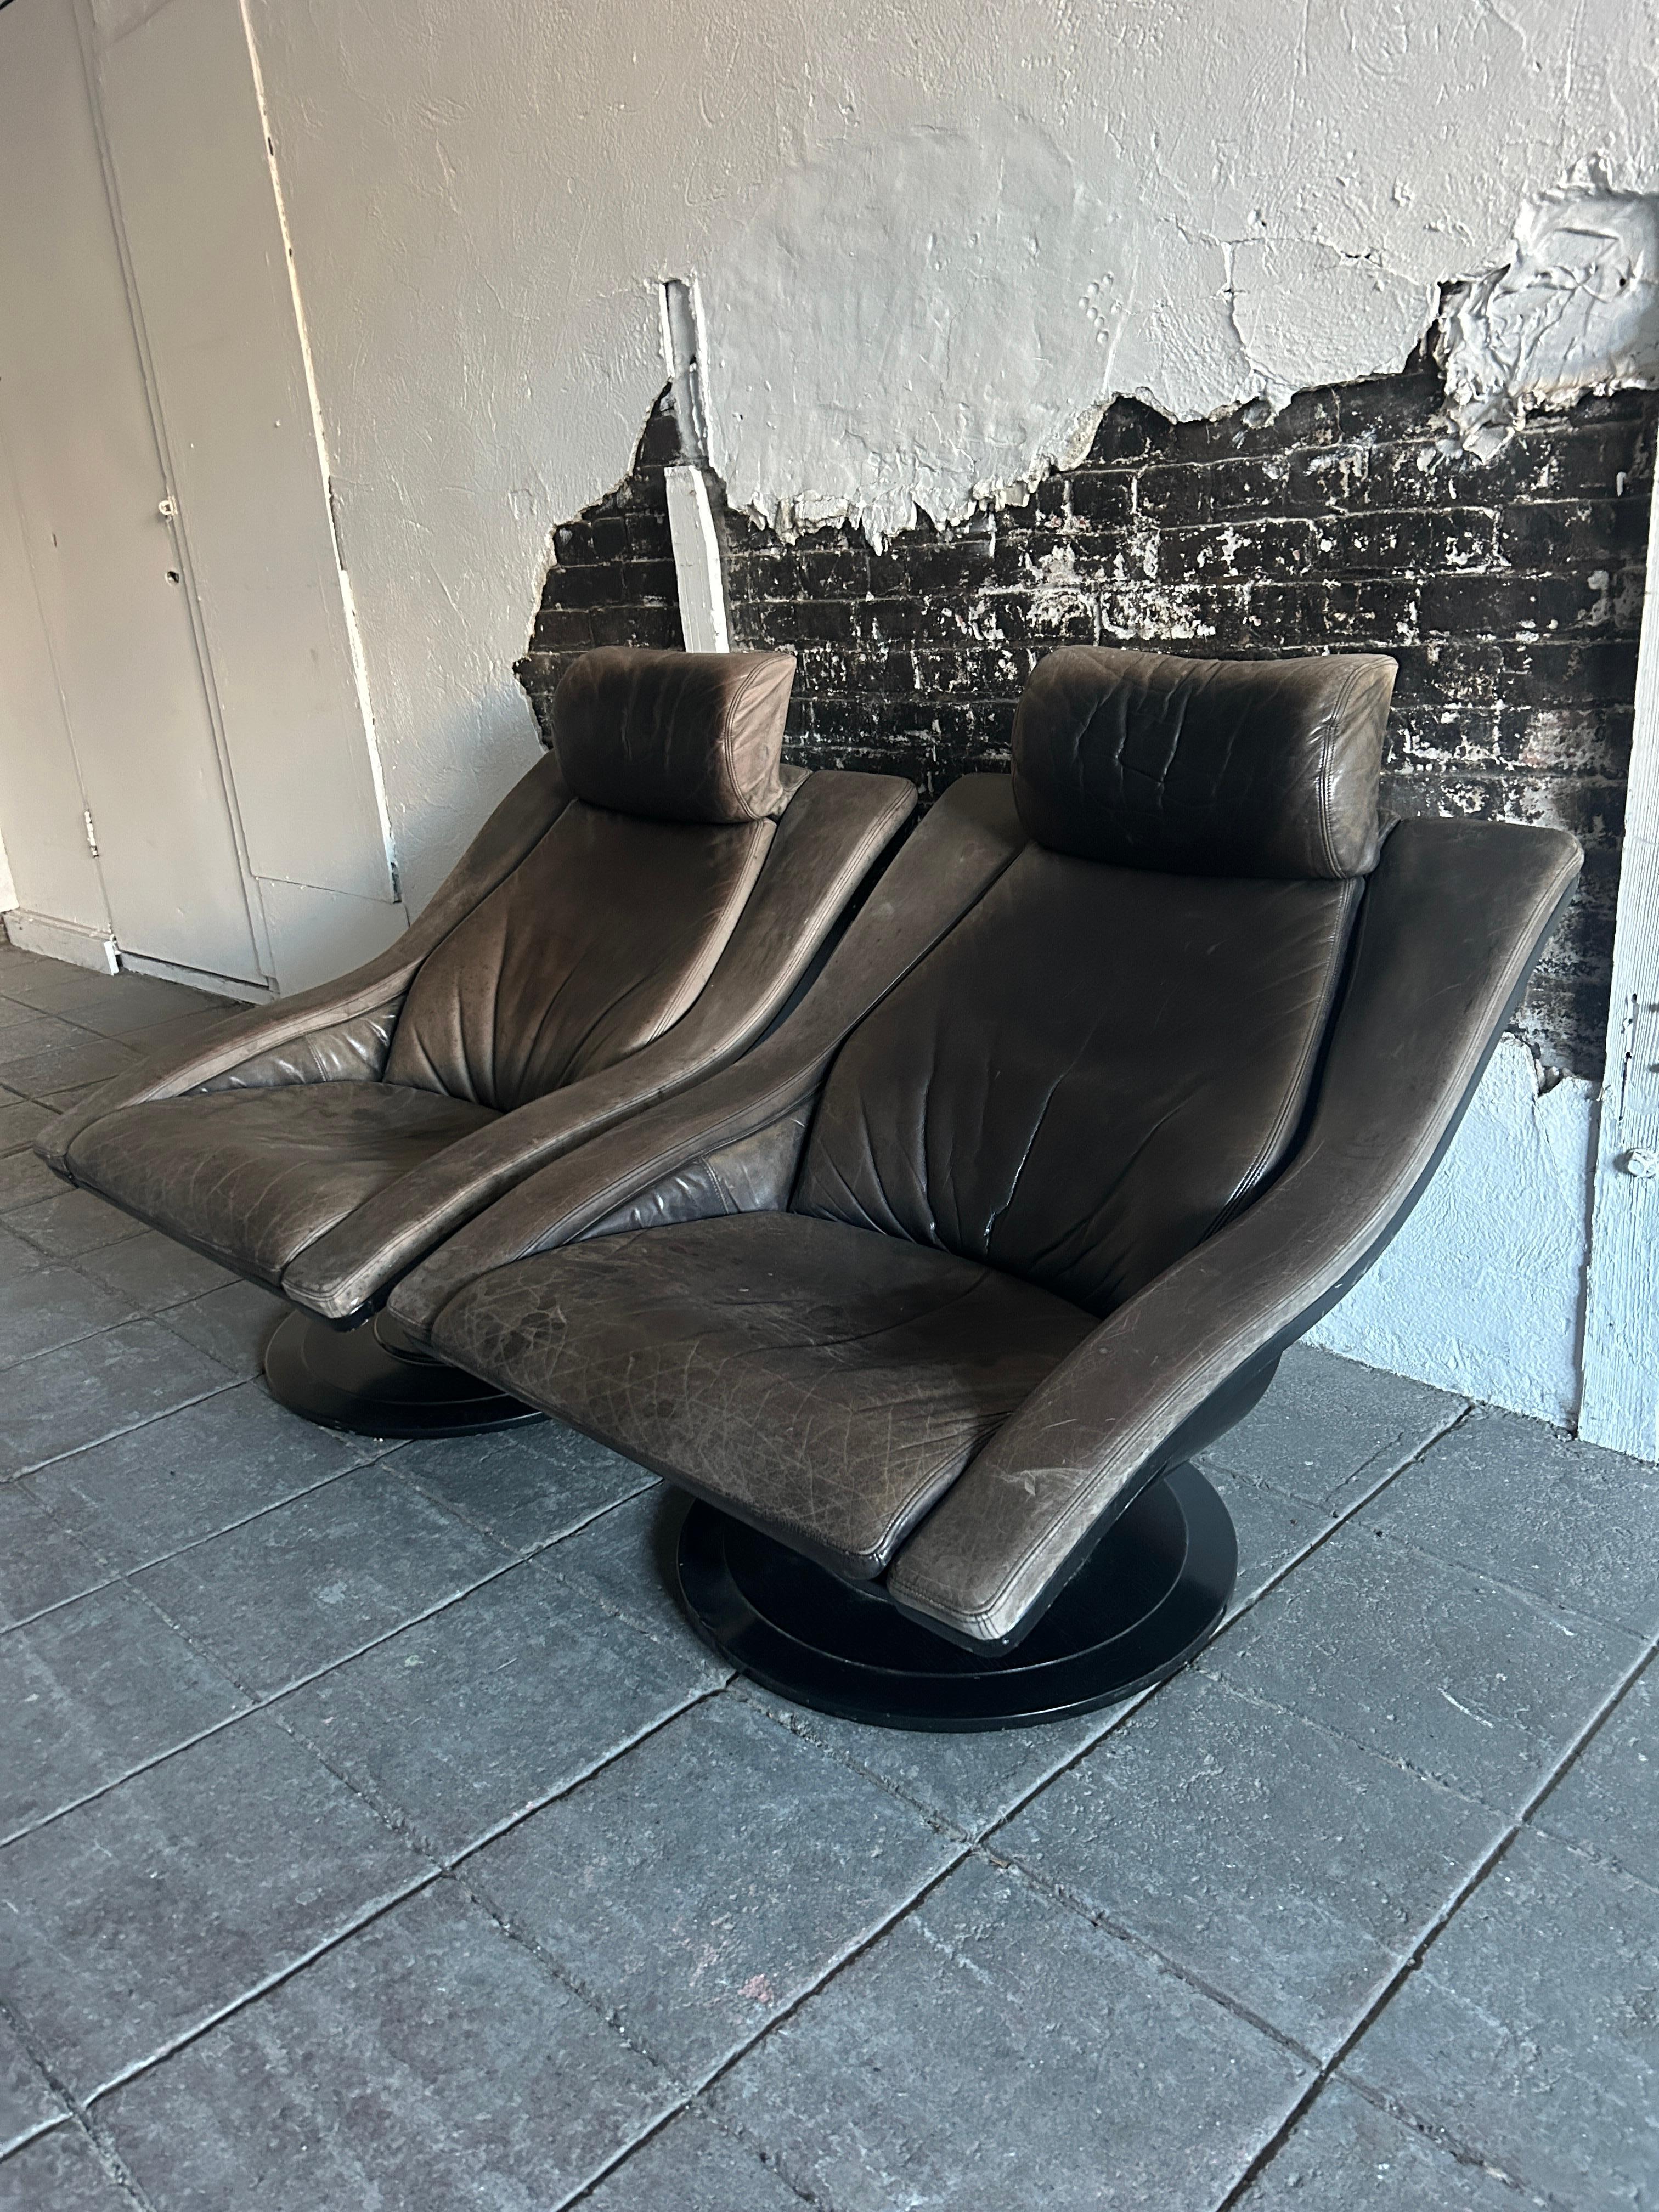 Pair of Nelo Wave Chairs by Takeshita Okamura & Erik Marquardsen for Nelo of Sweden. Gray and black patina leather chairs with black lacquer wood frames. Good vintage condition. Great design and comfortable. Chairs do swivel. Made in Sweden. Located